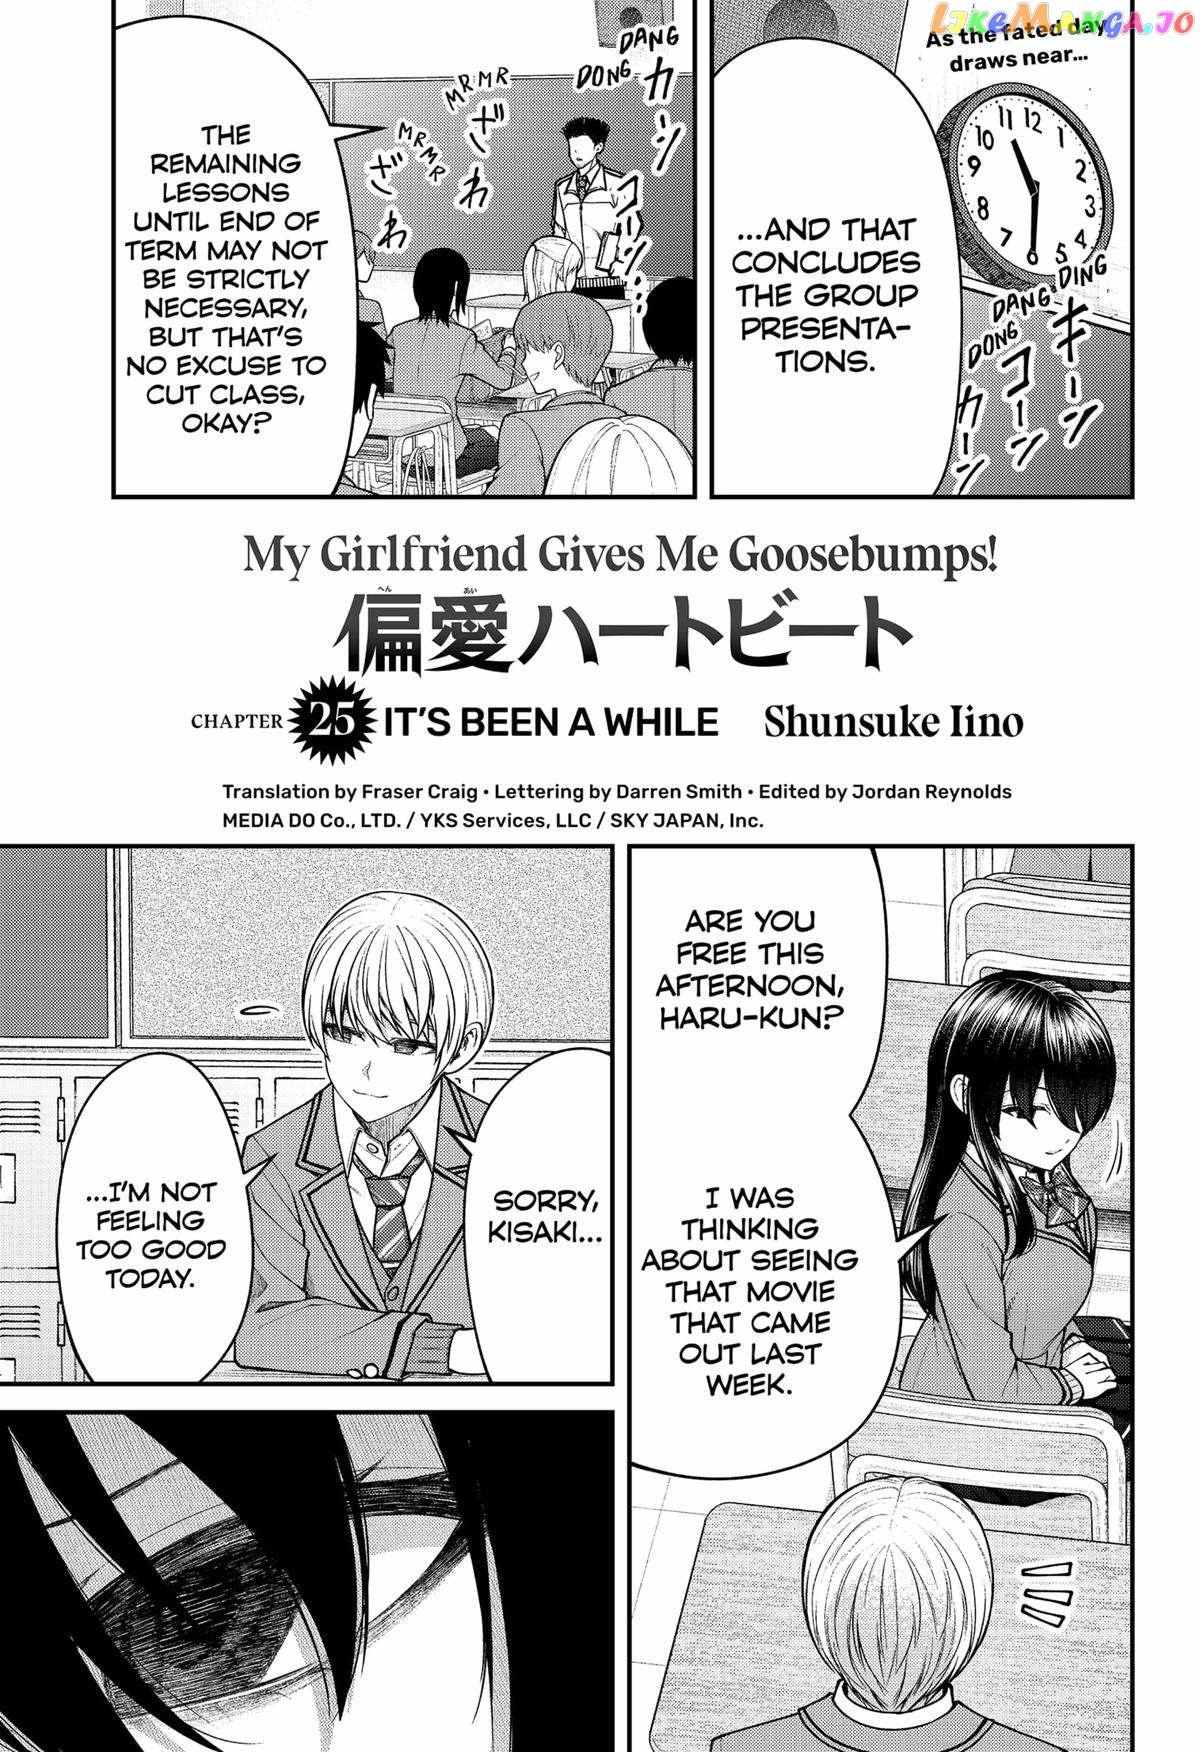 My Girlfriend Gives Me Goosebumps! - Page 1